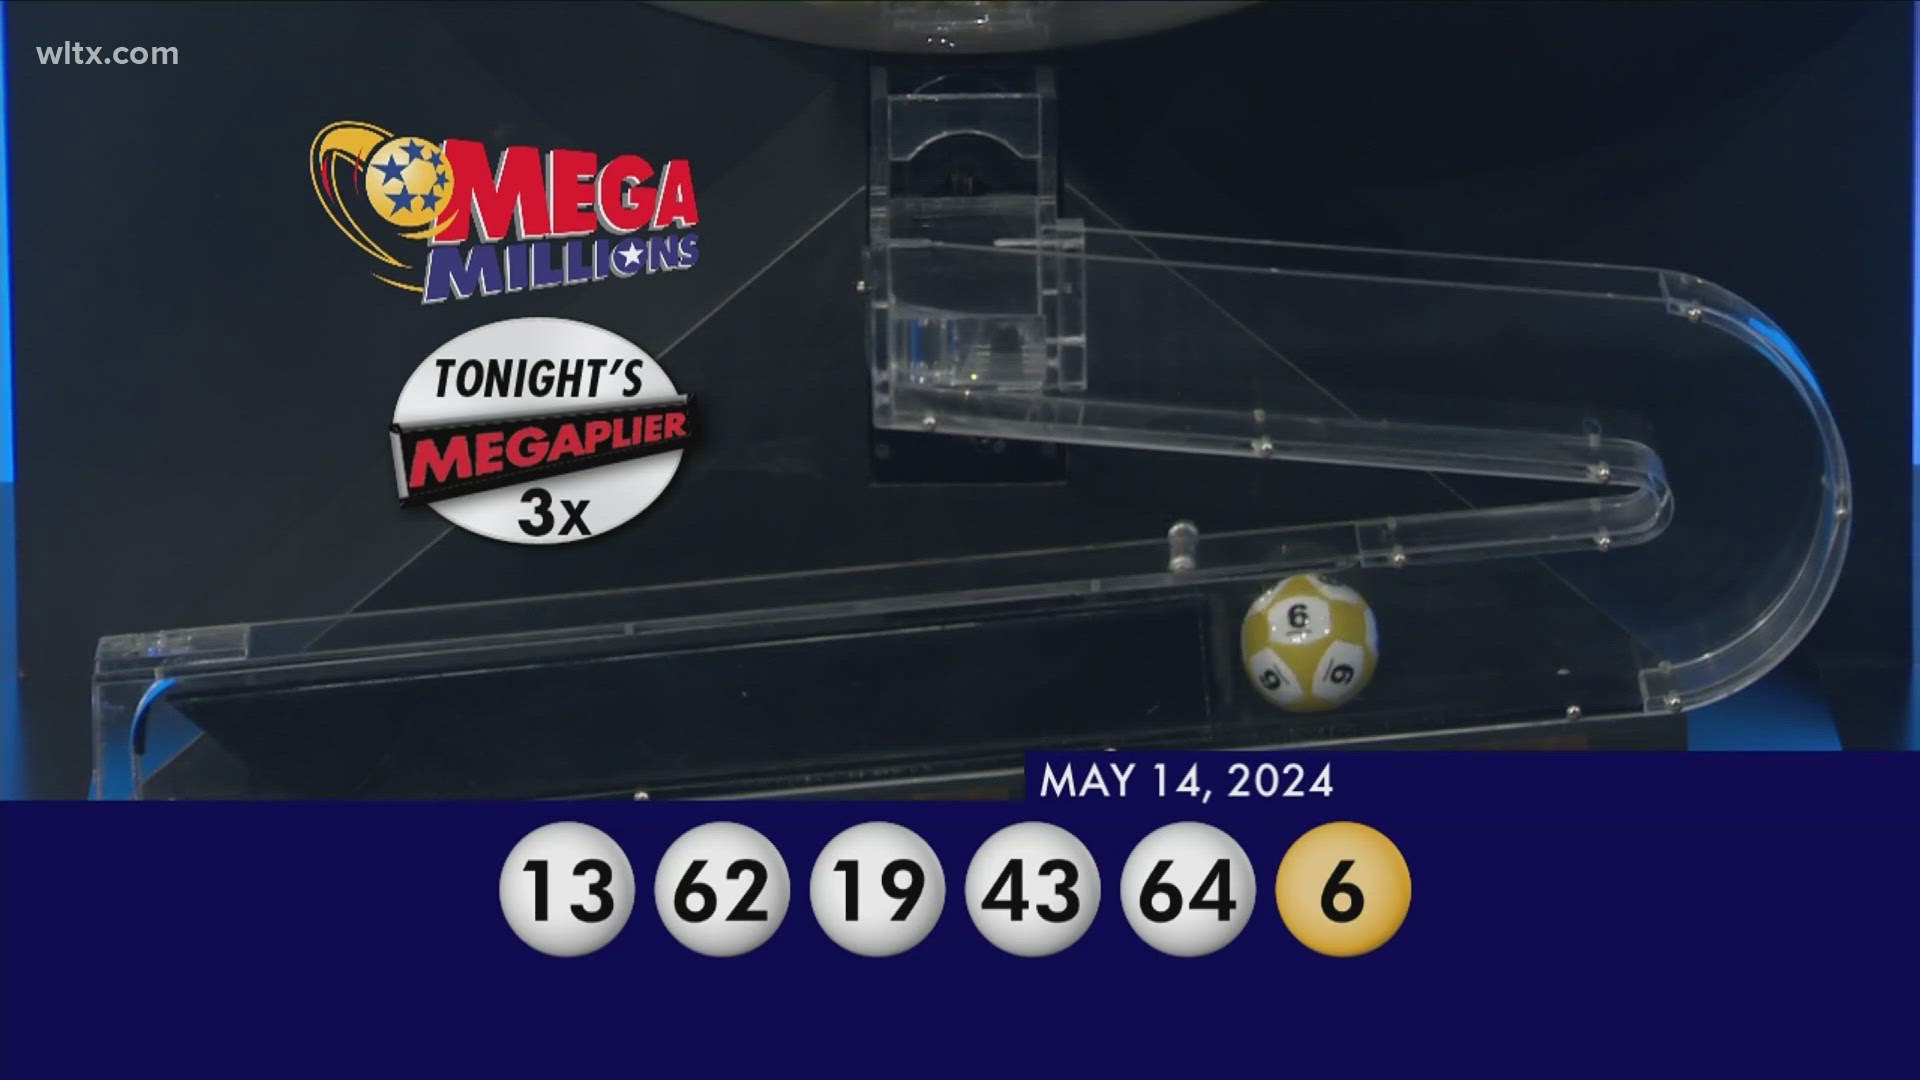 Here are the MegaMillions winning numbers for May 14, 2024.